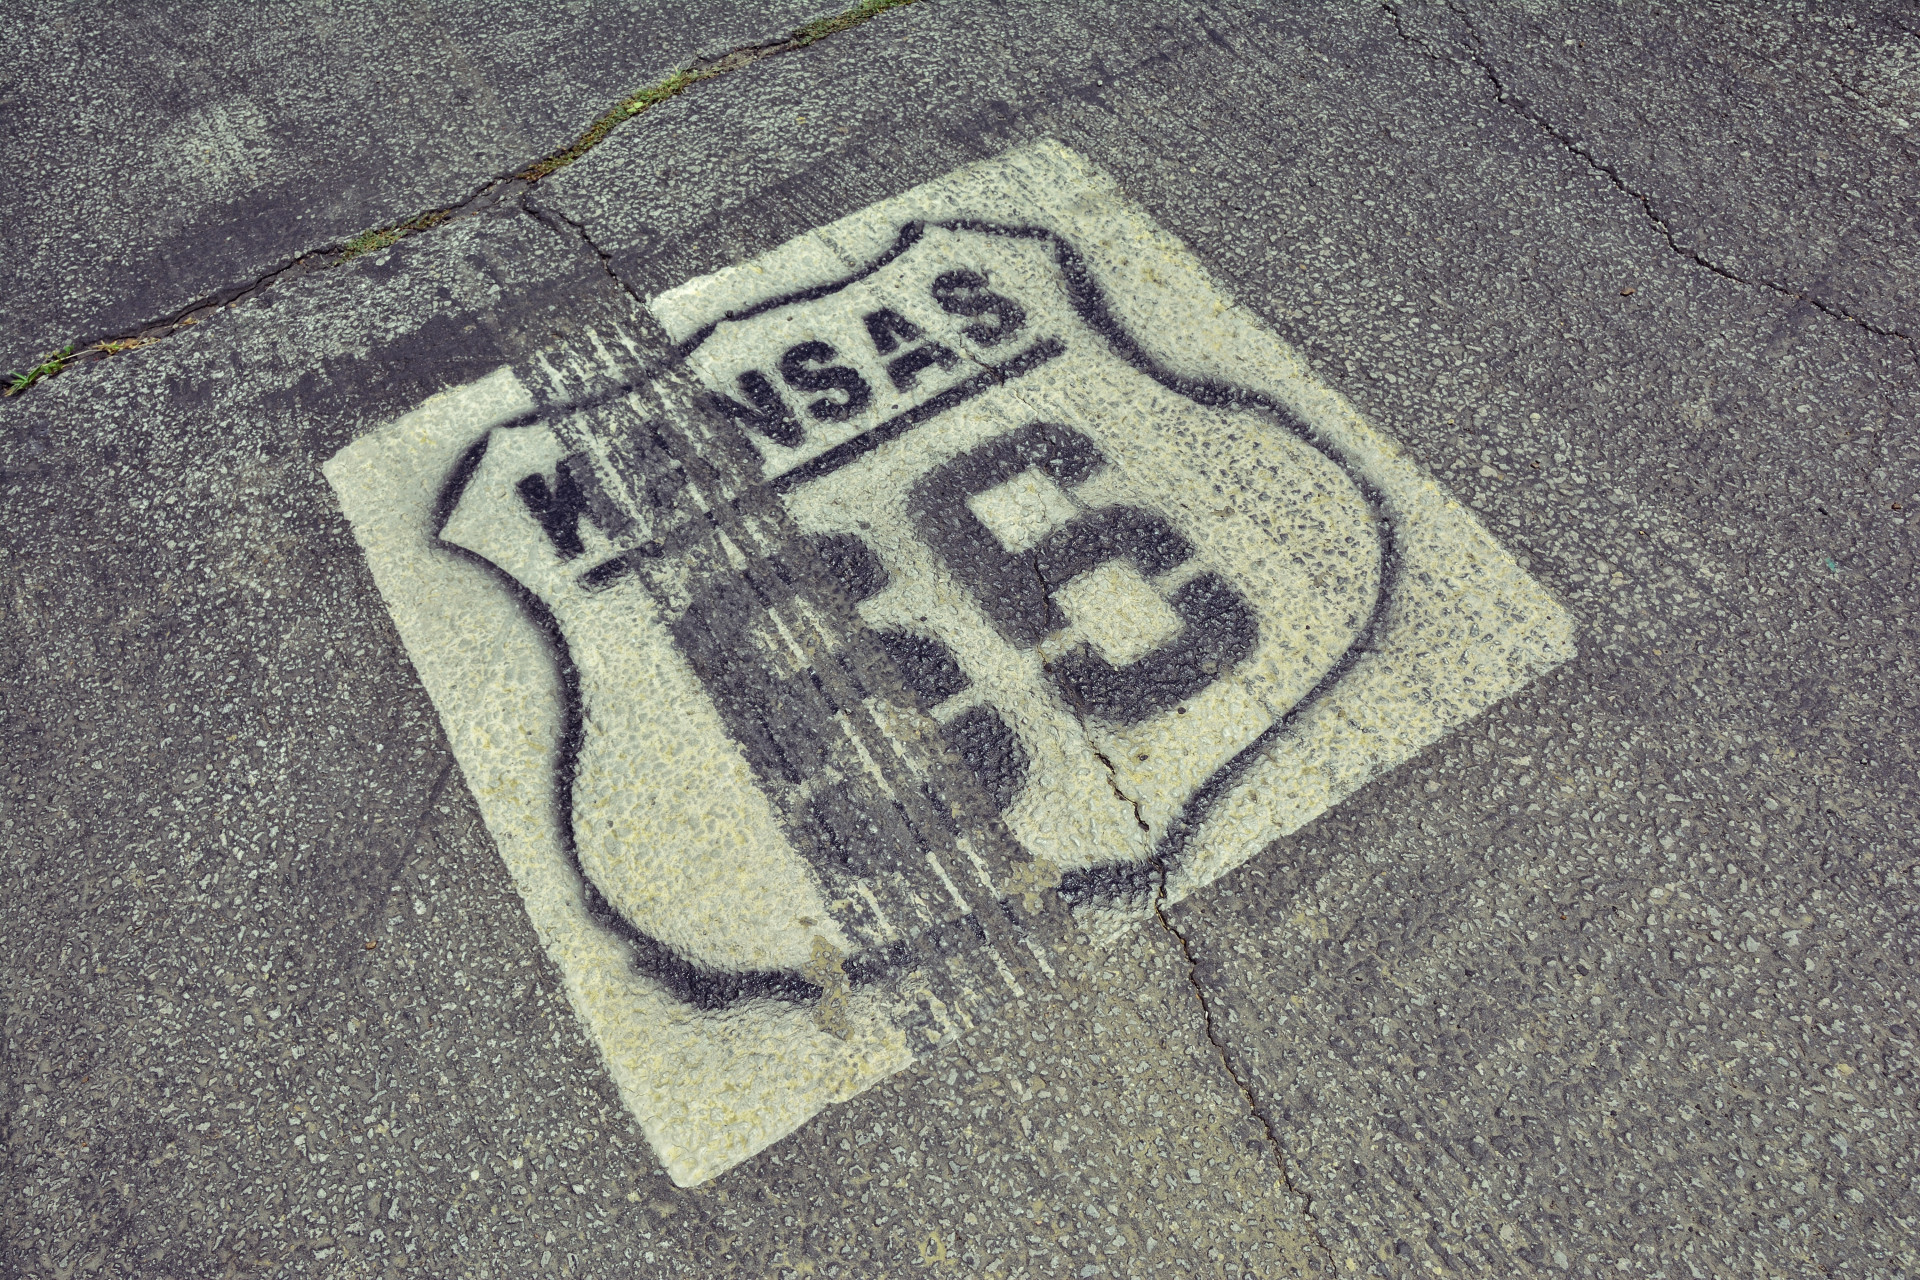 Burning rubber along the Kansas stretch of Route 66.